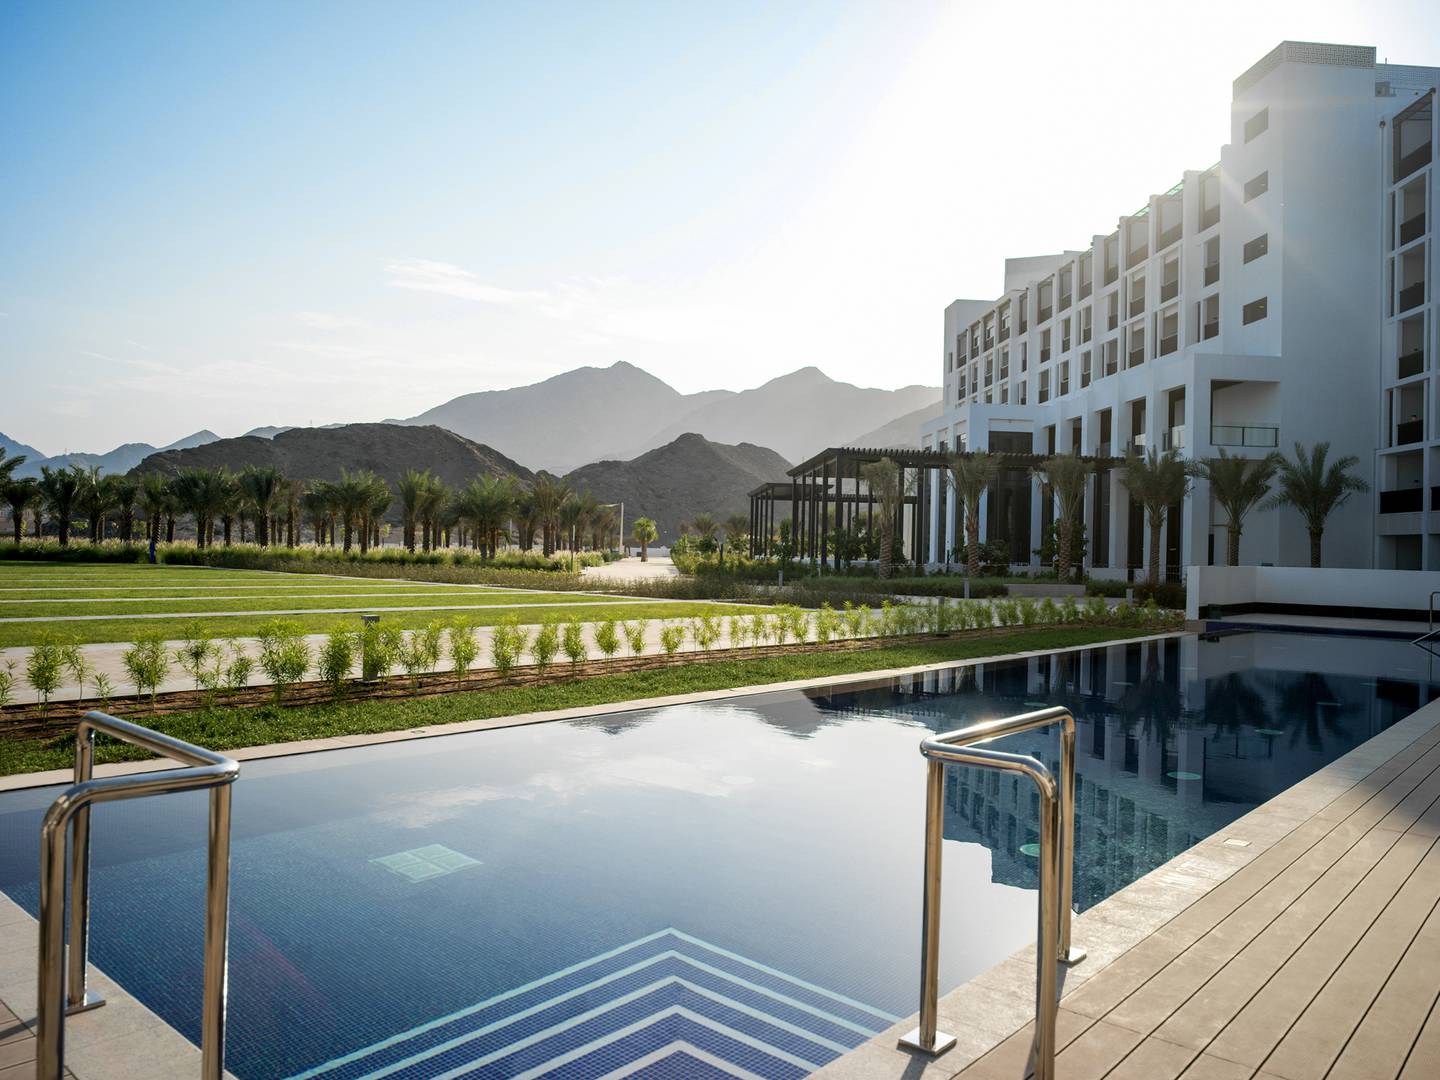 Enjoy an all inclusive stay at The InterContinental Fujairah this Eid. Photo: IHG